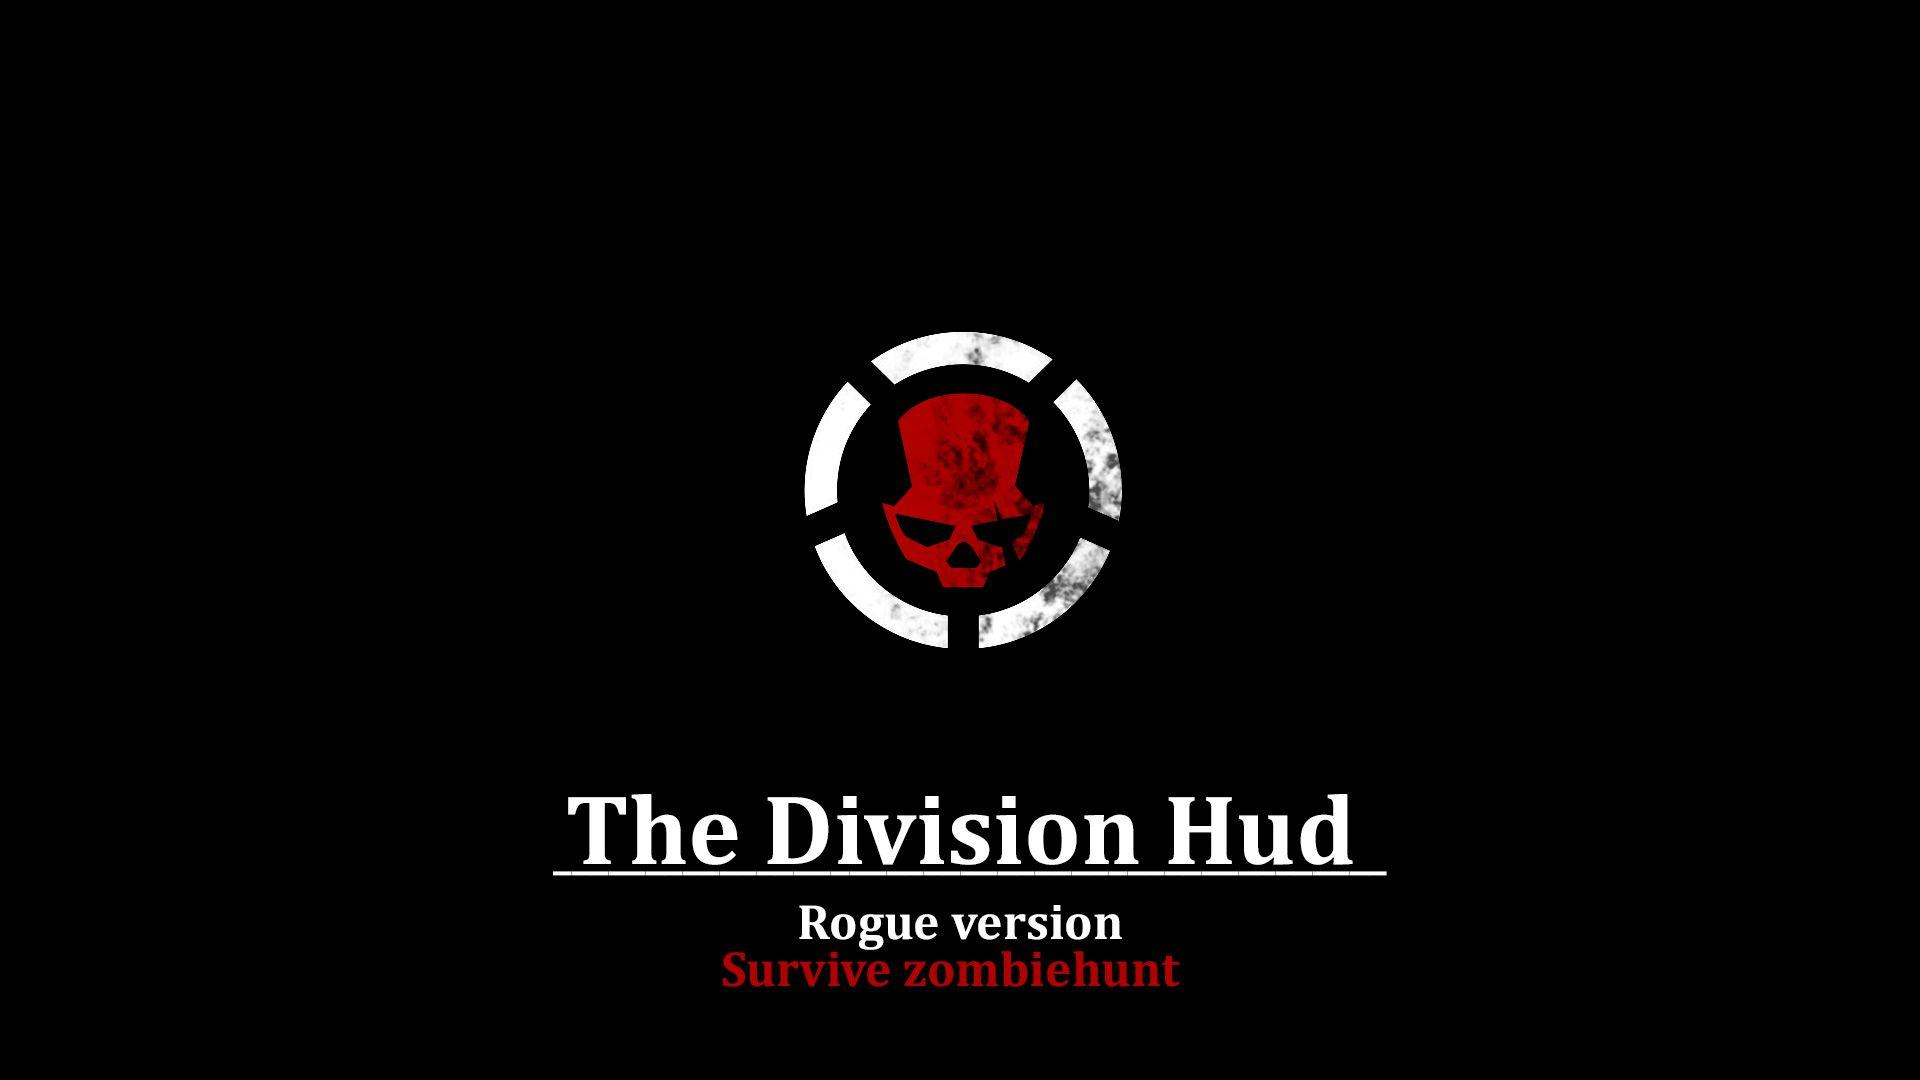 The Division Rogue Logo - Steam Workshop - The Division HUD [rogue version]